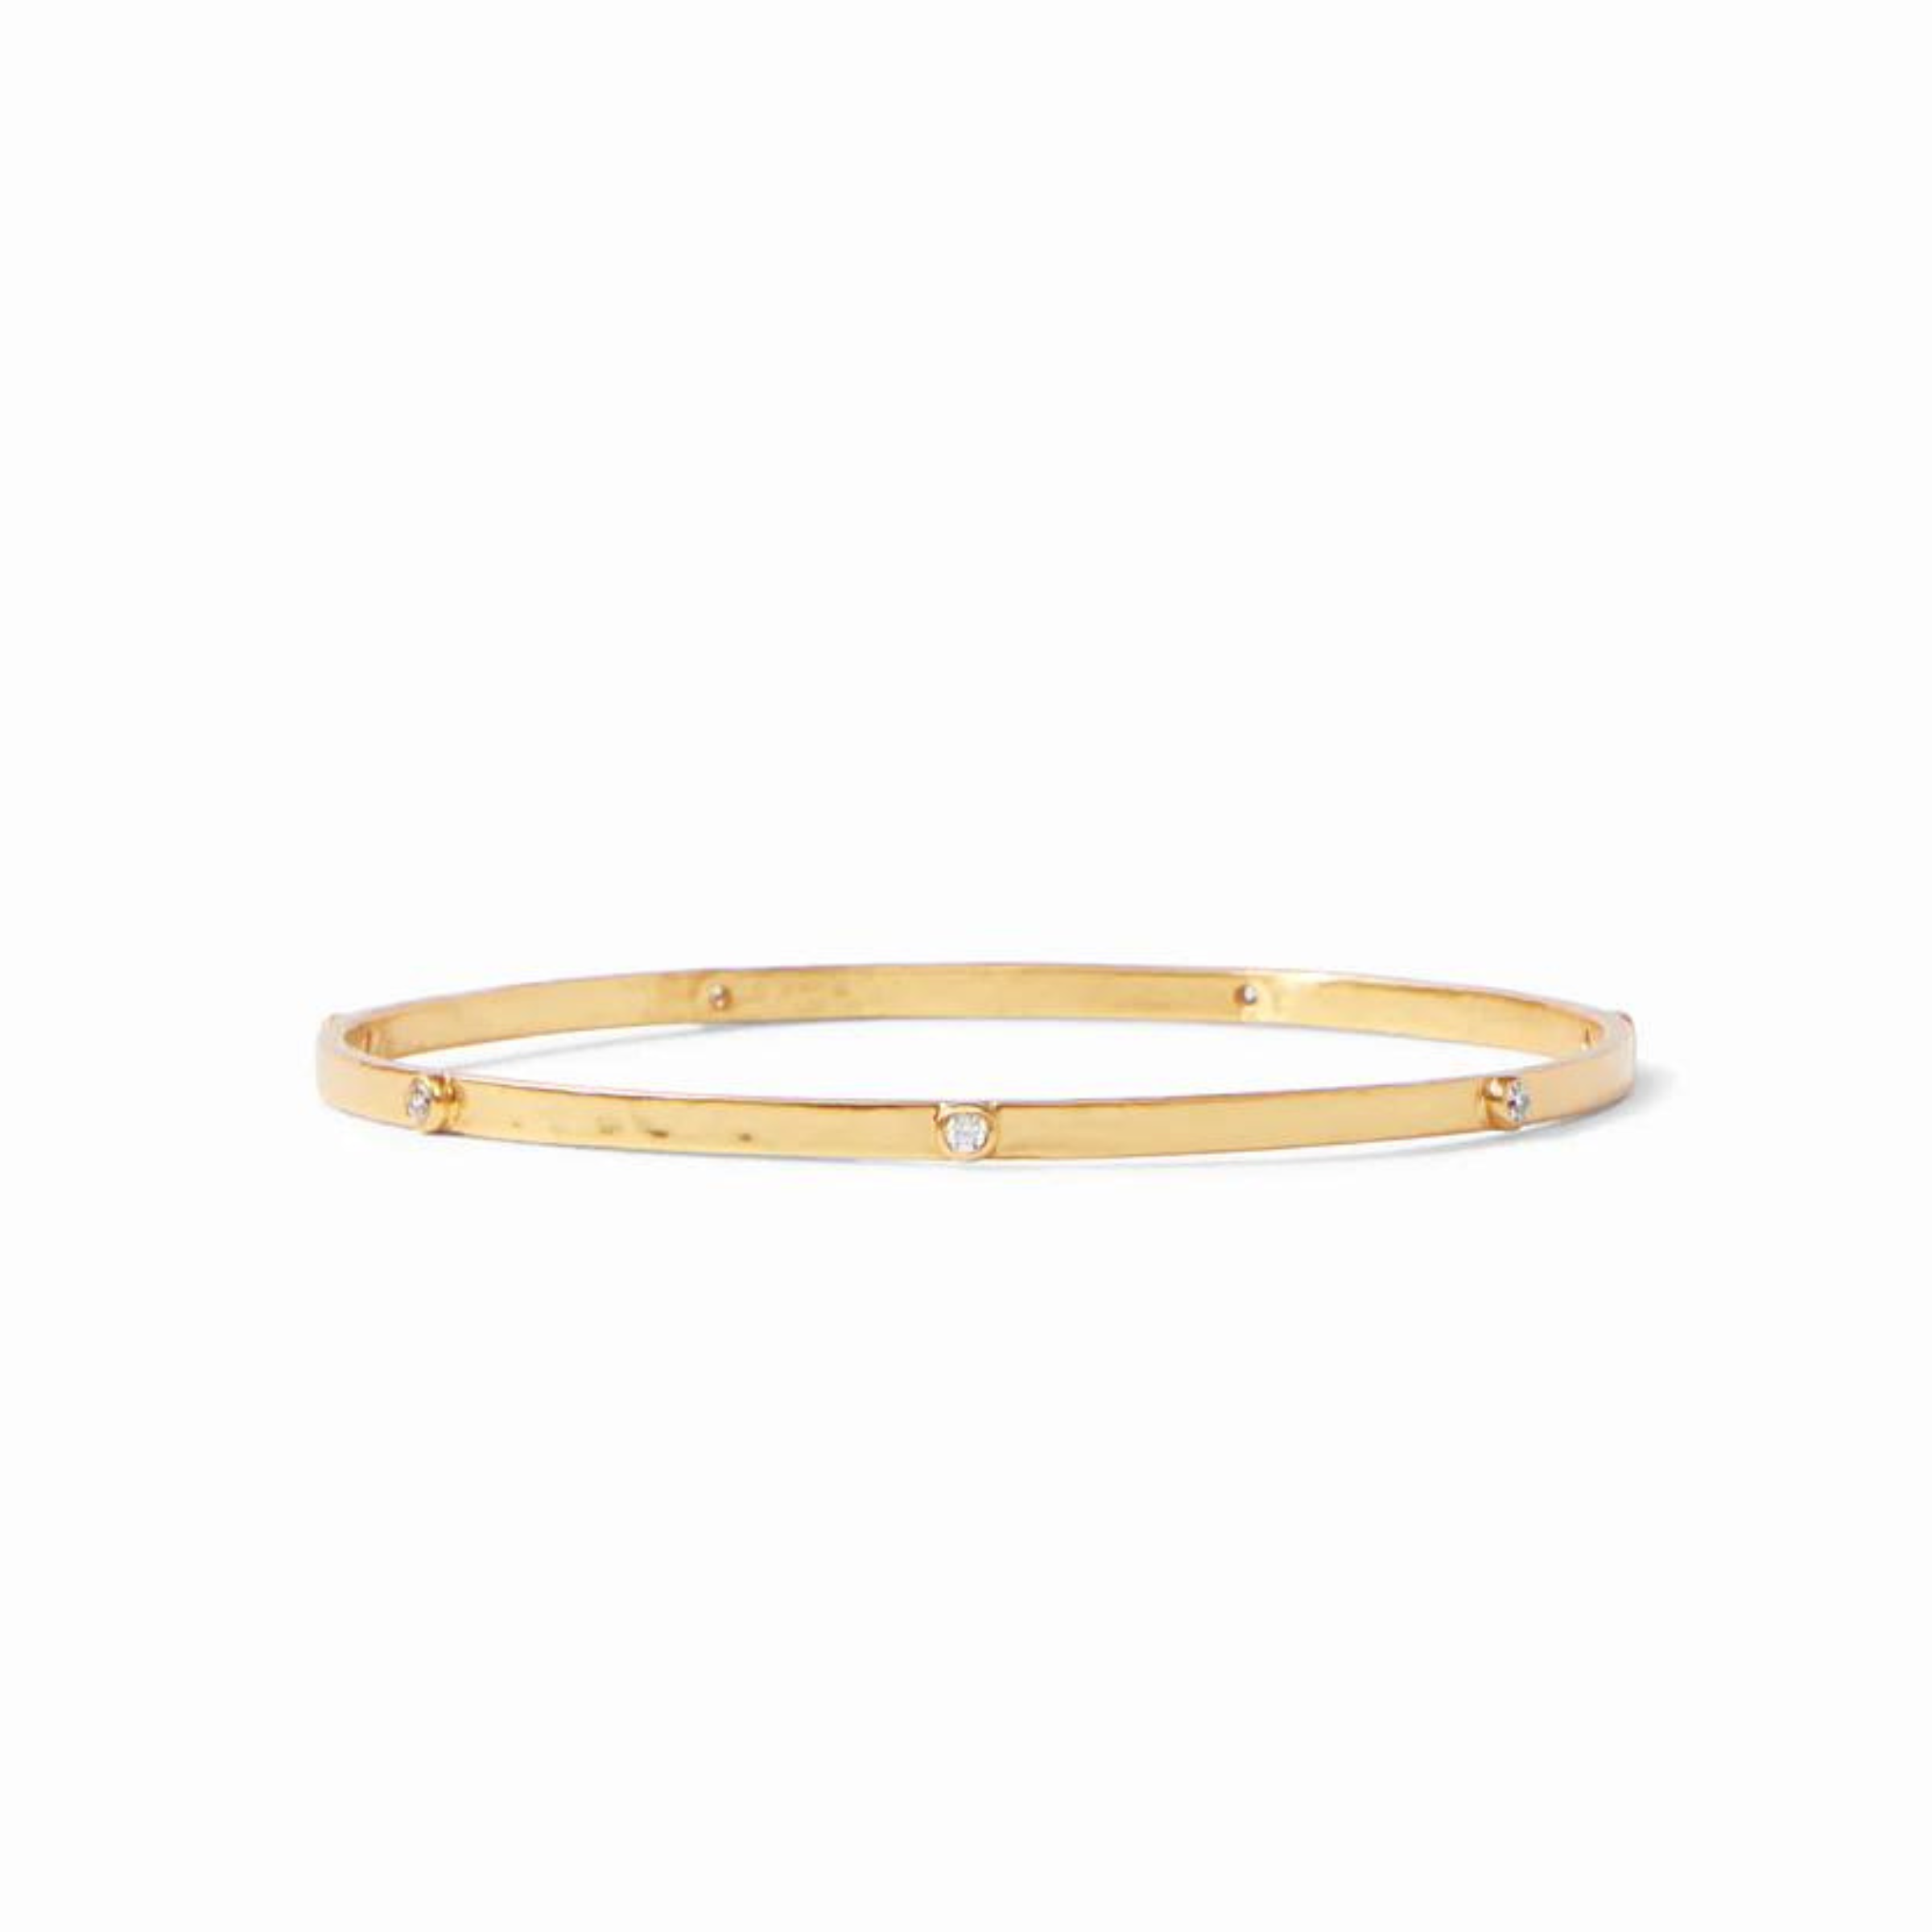 Gold, hammered bangle with clear crystals. This bracelet is pictured on a white background. 